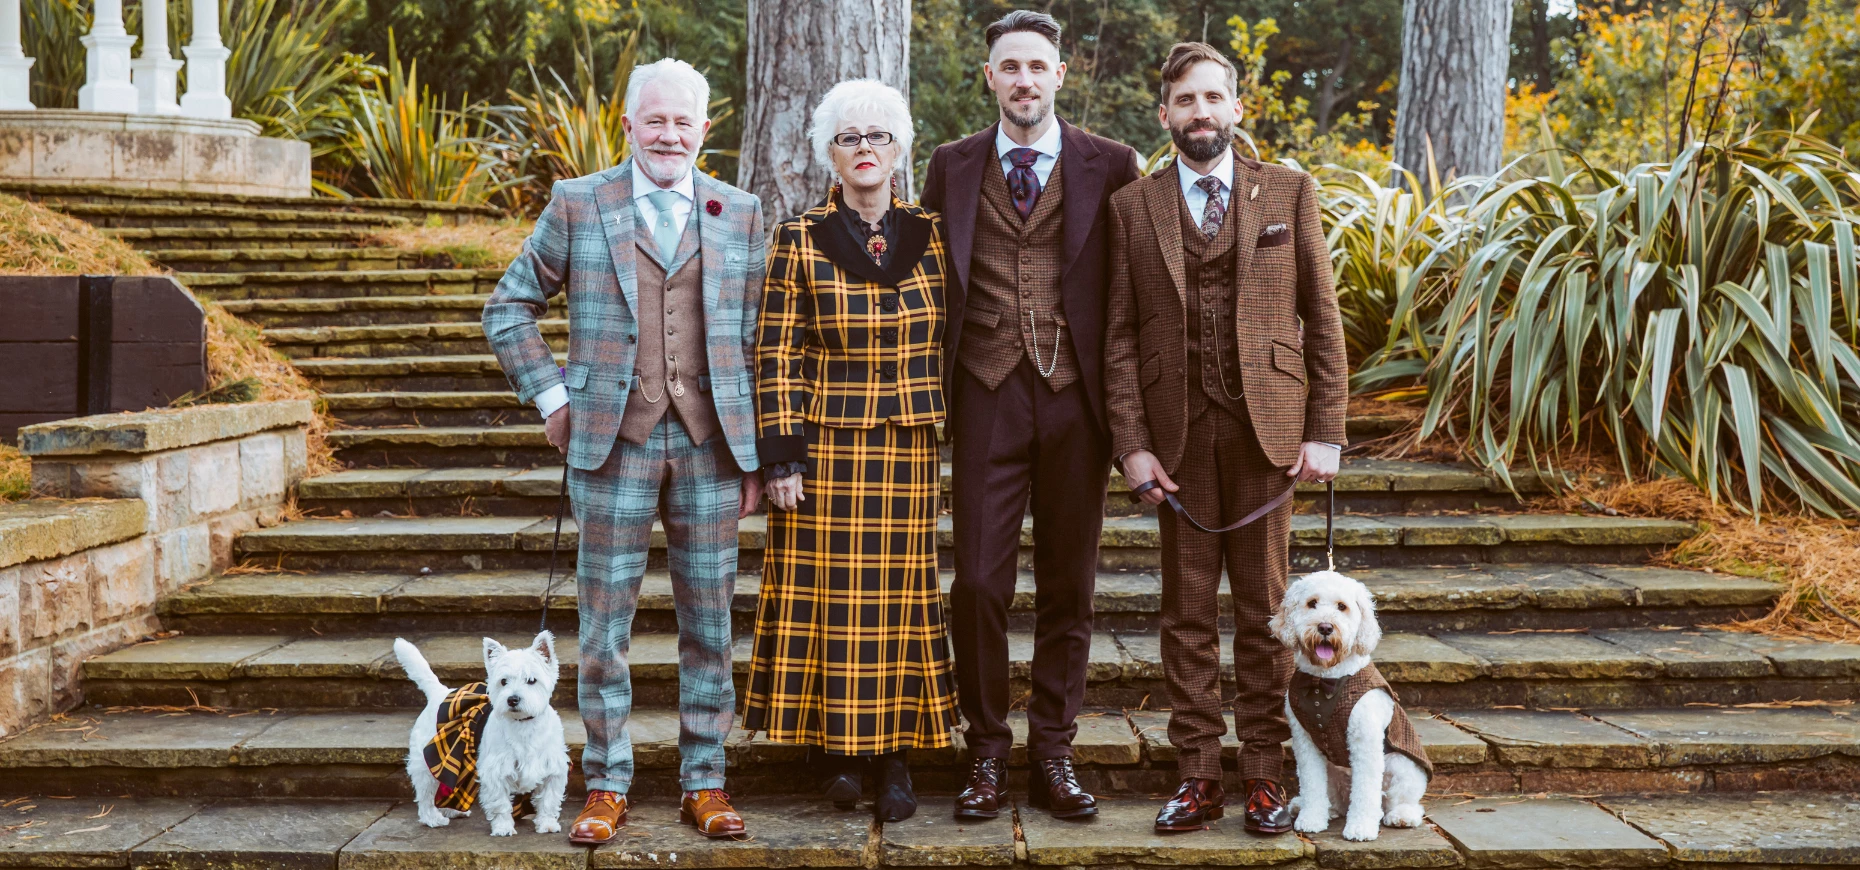 Founders Derrick Langley and Nicholas Harvey-James, along with their partners and dogs, all dressed in Dandy Threads attire.